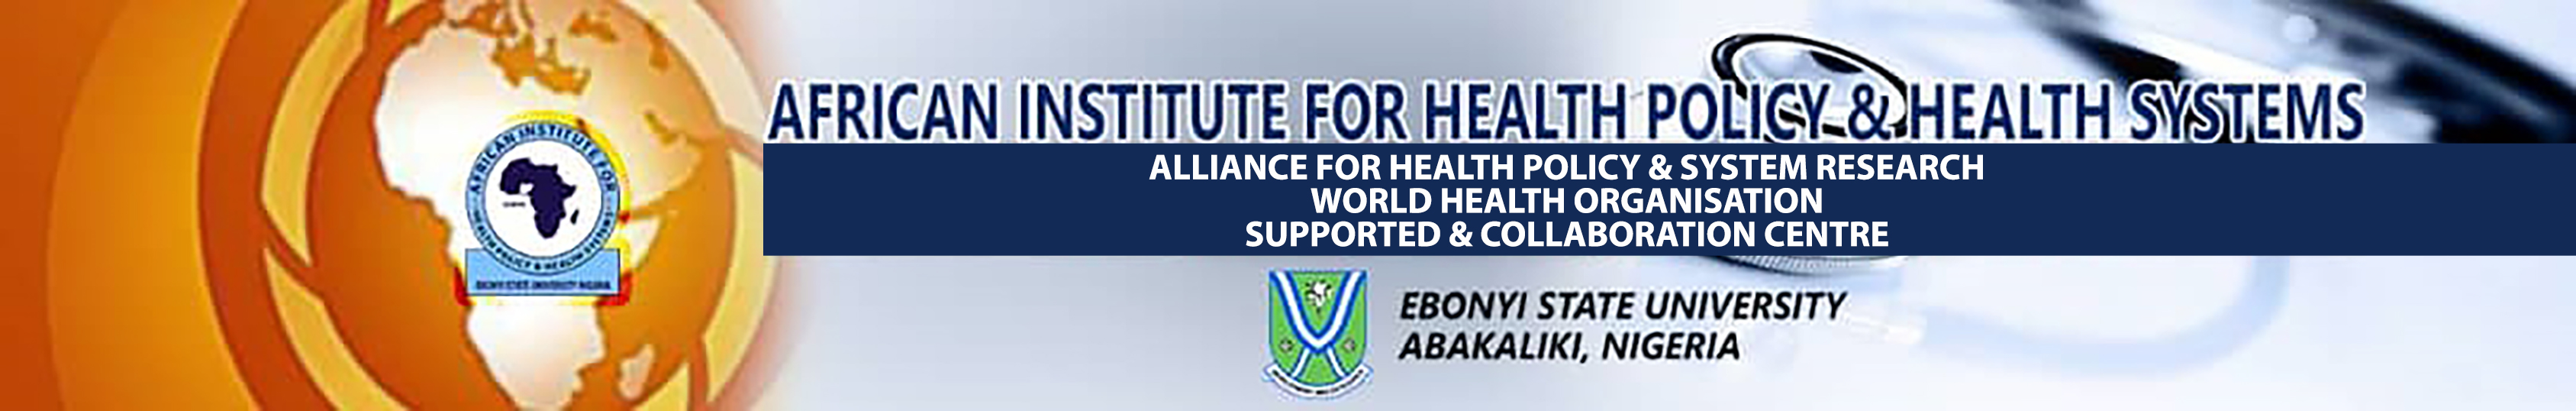 African Institute for Health Policy & Health Systems Studies